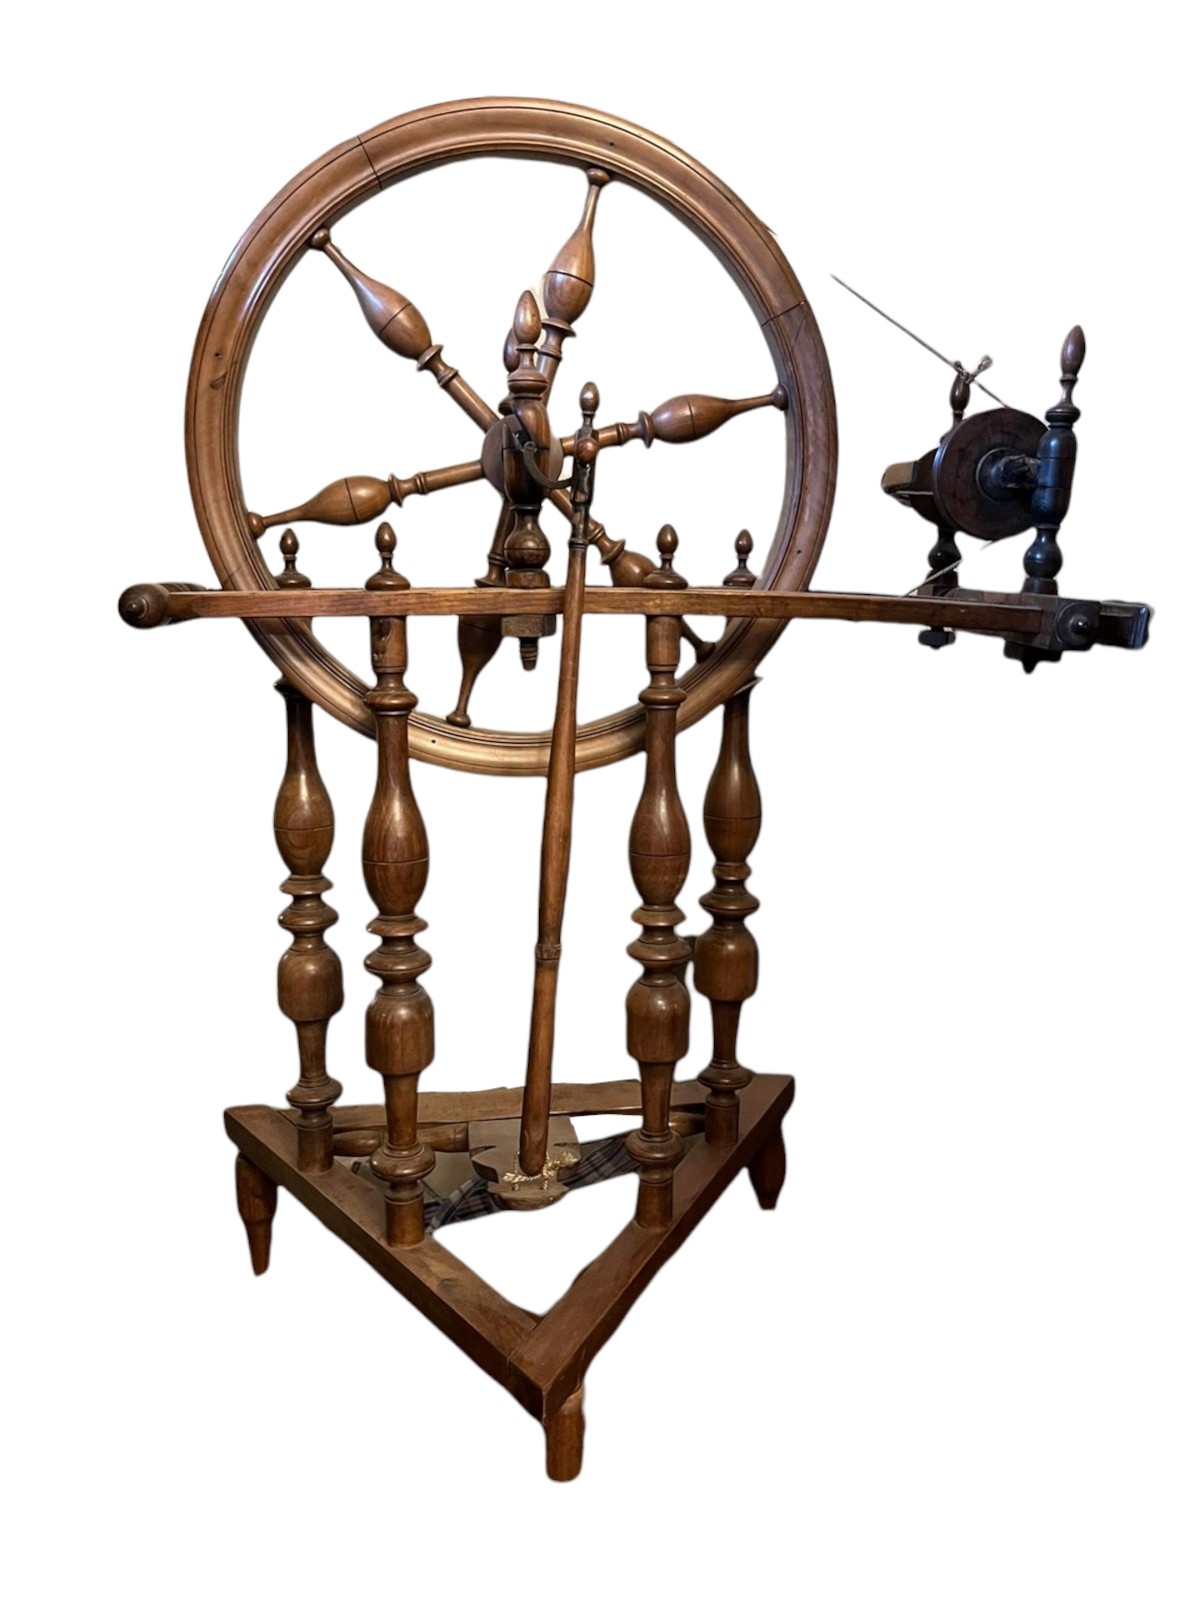 A 19TH CENTURY BEECHWOOD TREADLE SPINNING WHEEL Having turned spindles and columns. (74cm x 36cm x